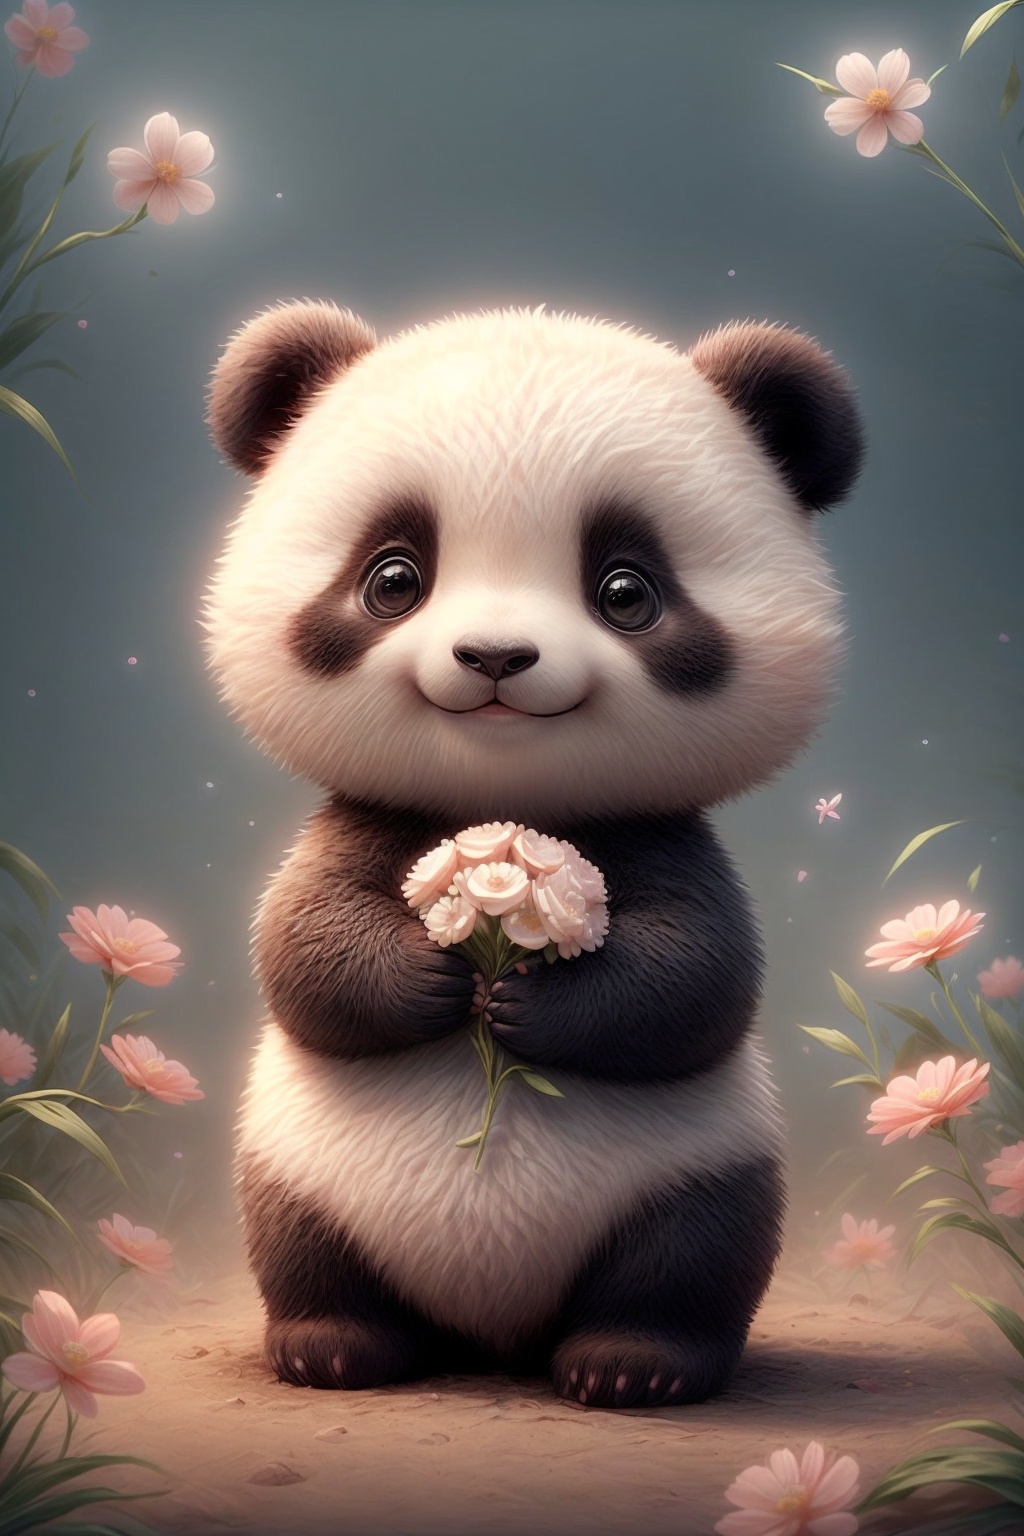 tiny cute baby panda with colorful flowers in her hands can hardly stand the flowers, close up, cinematic, award-winning, hyperrealism, photography., MG xiongmao